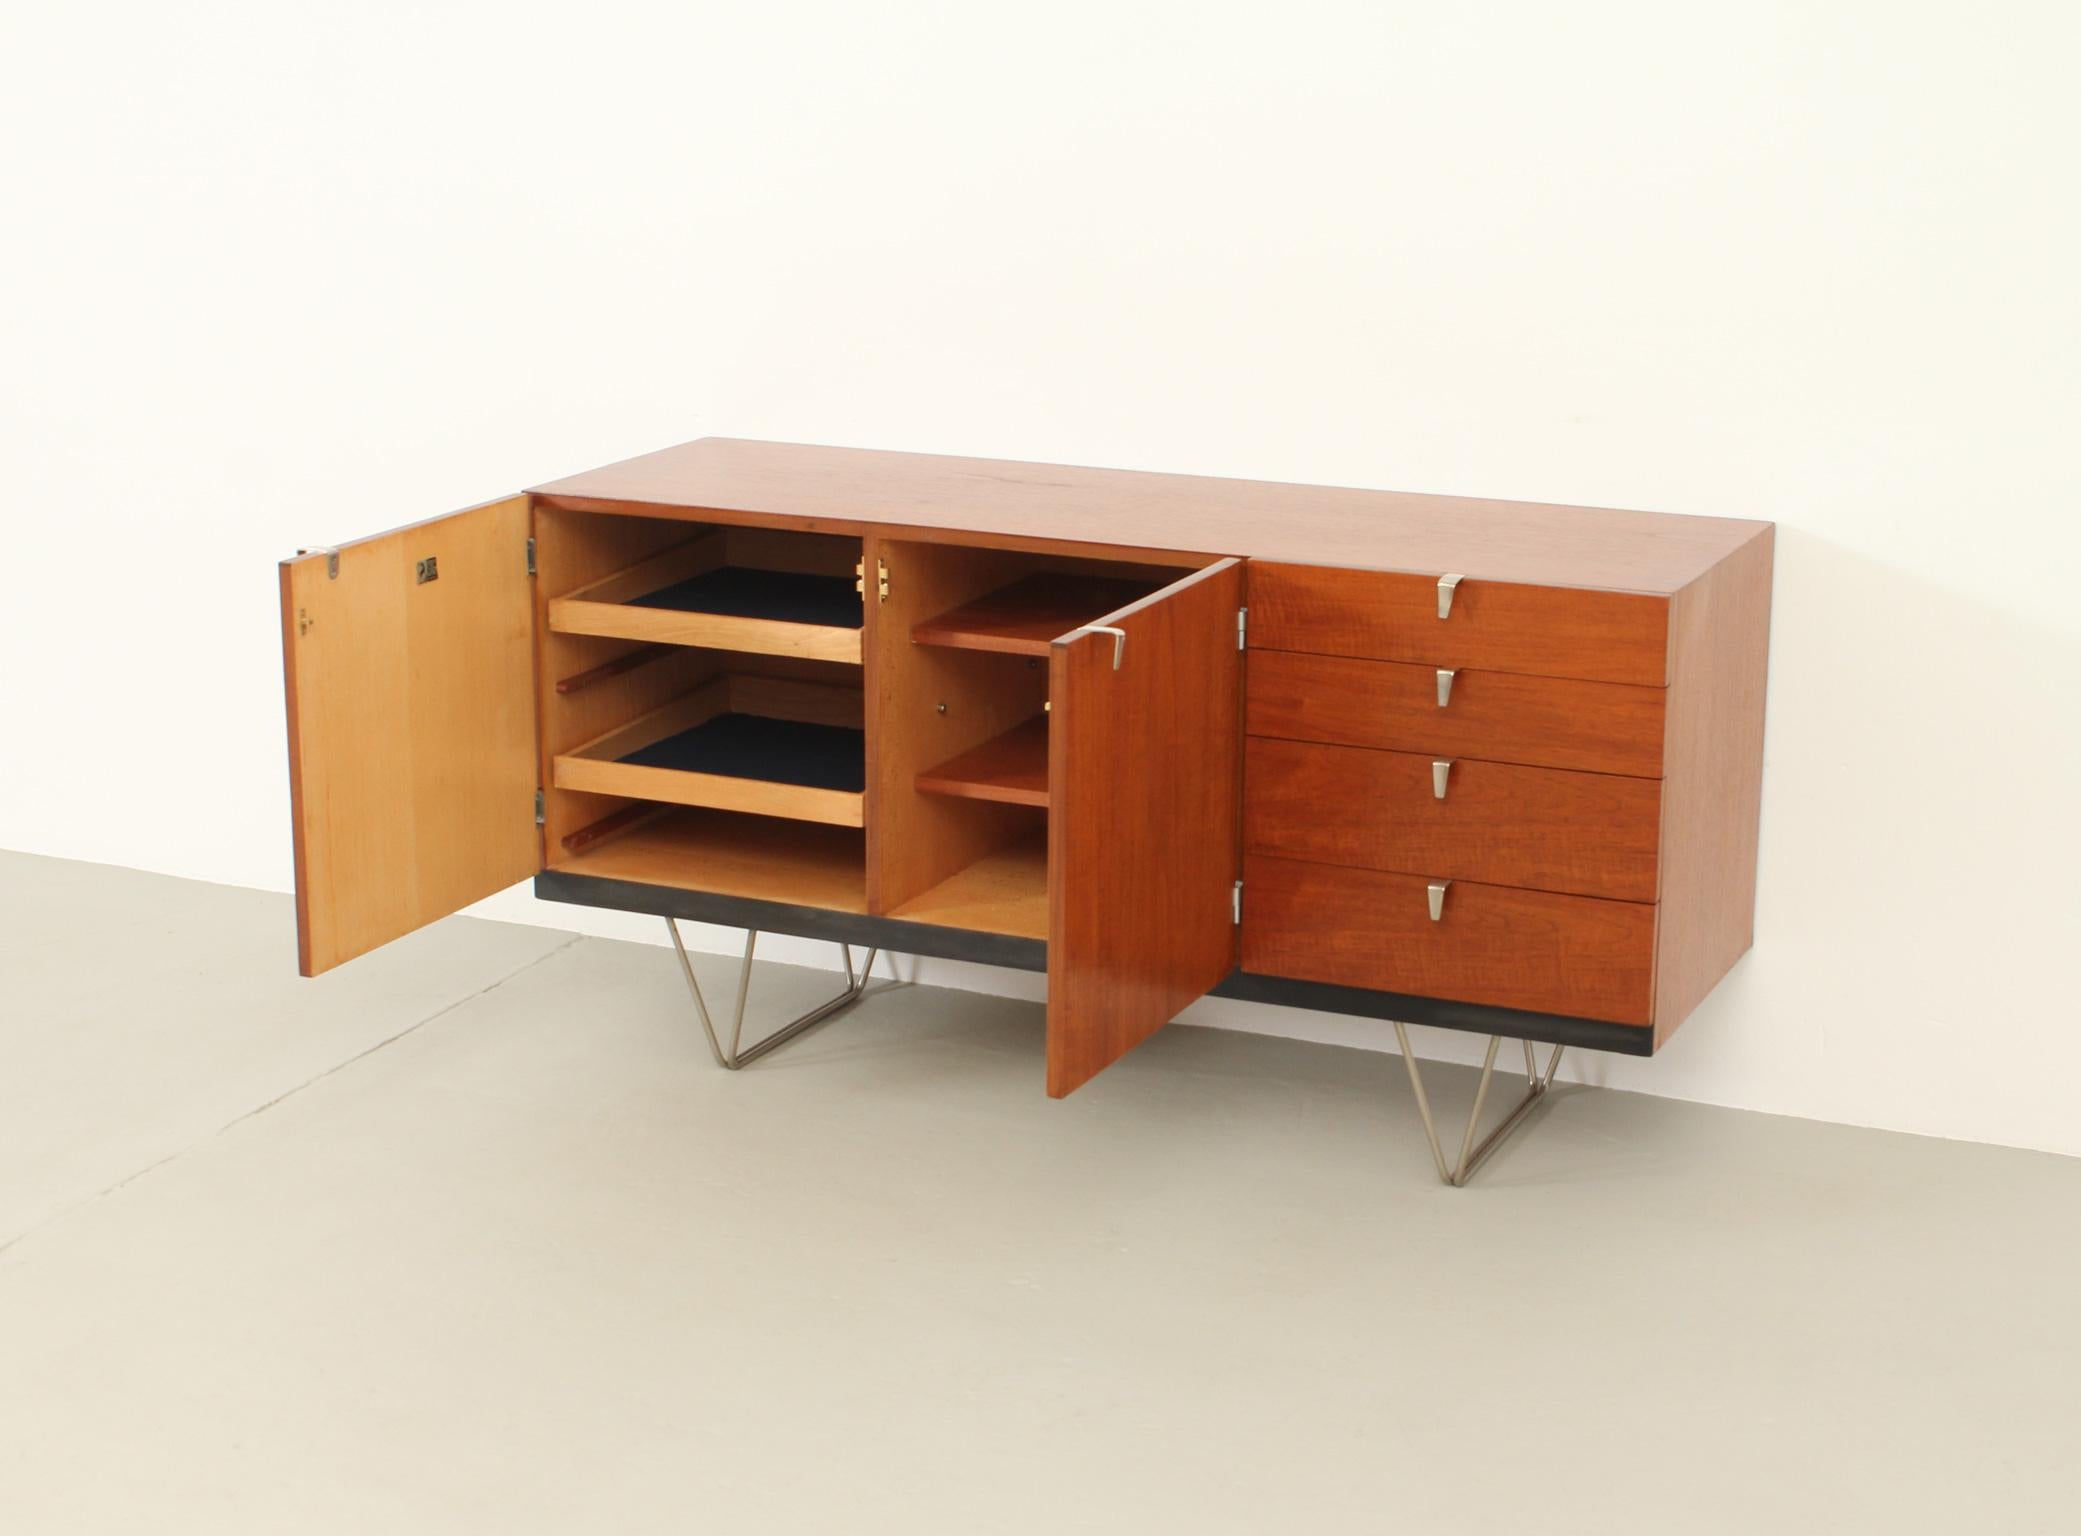 S Range Sideboard by John and Sylvia Reid for Stag Furniture, UK, 1959 For Sale 2